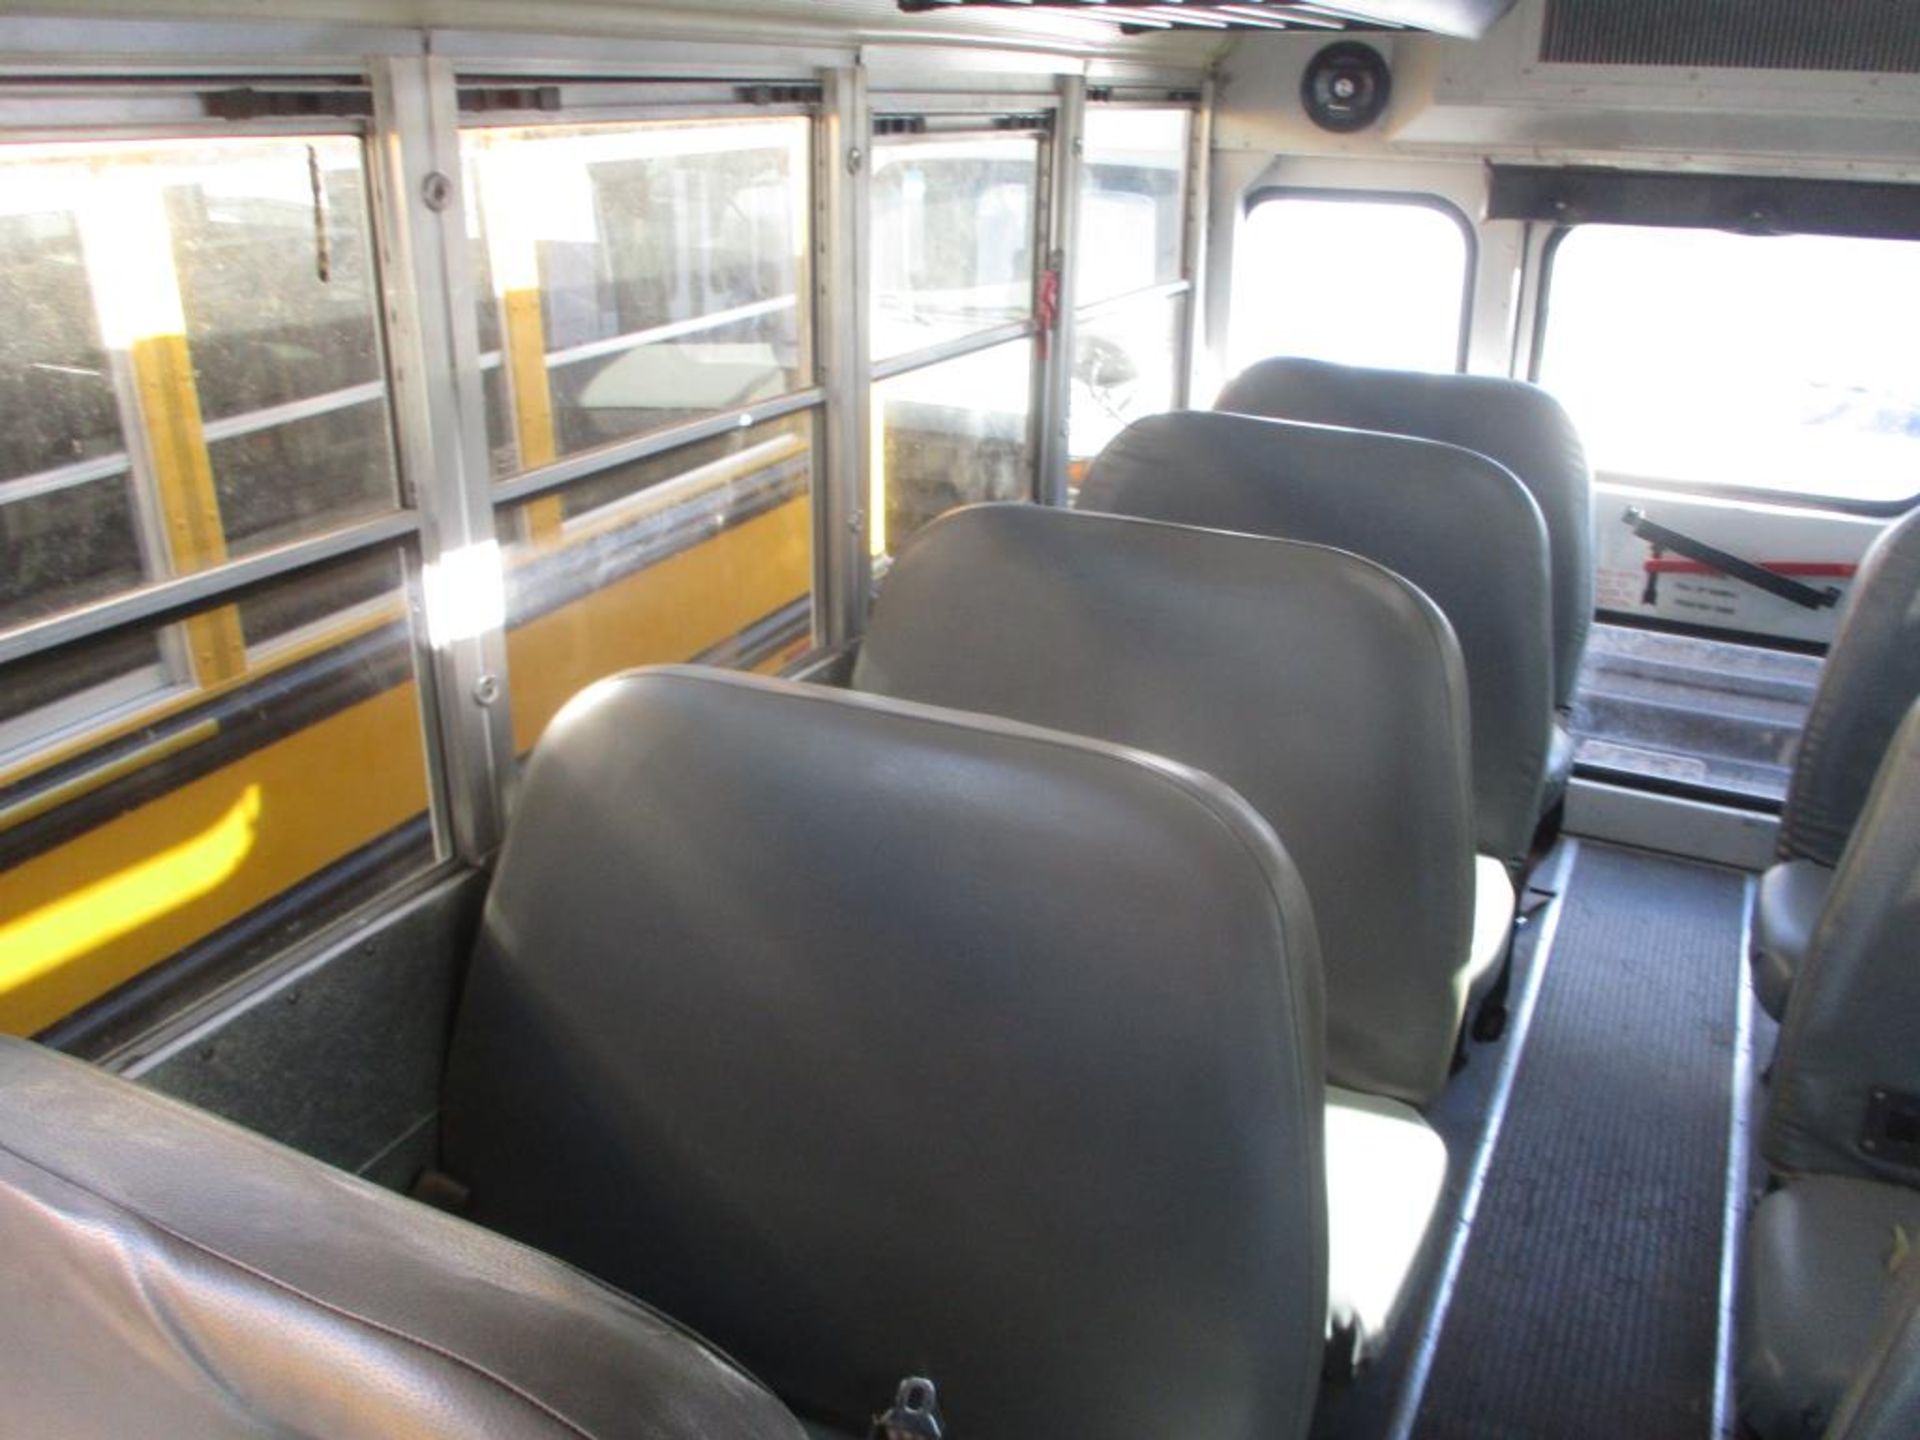 (Lot # 3922) - 2008 Ford E-Series School Bus - Image 7 of 11